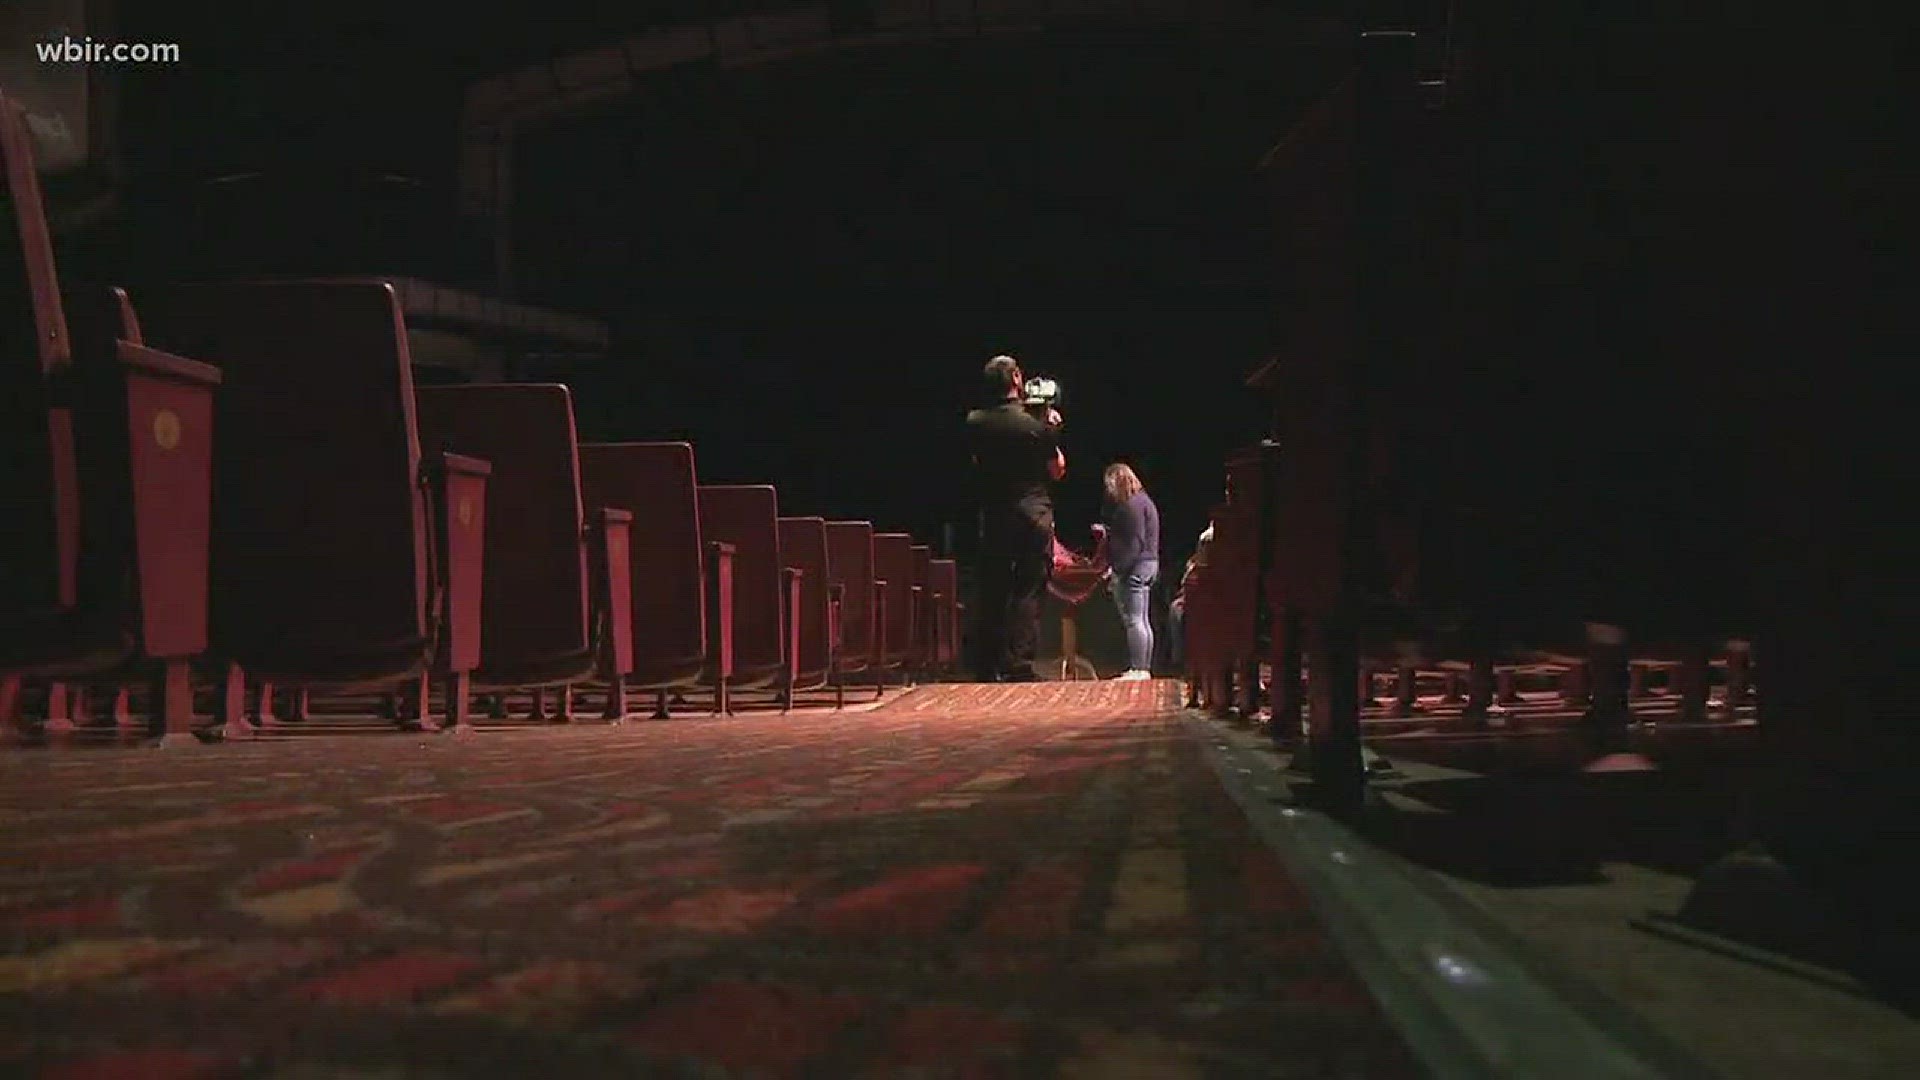 A technician at the Smoky Mountain Opry remain in the hospital tonight after a CO2 leak on Saturday night forced hundreds of people to evacuate.